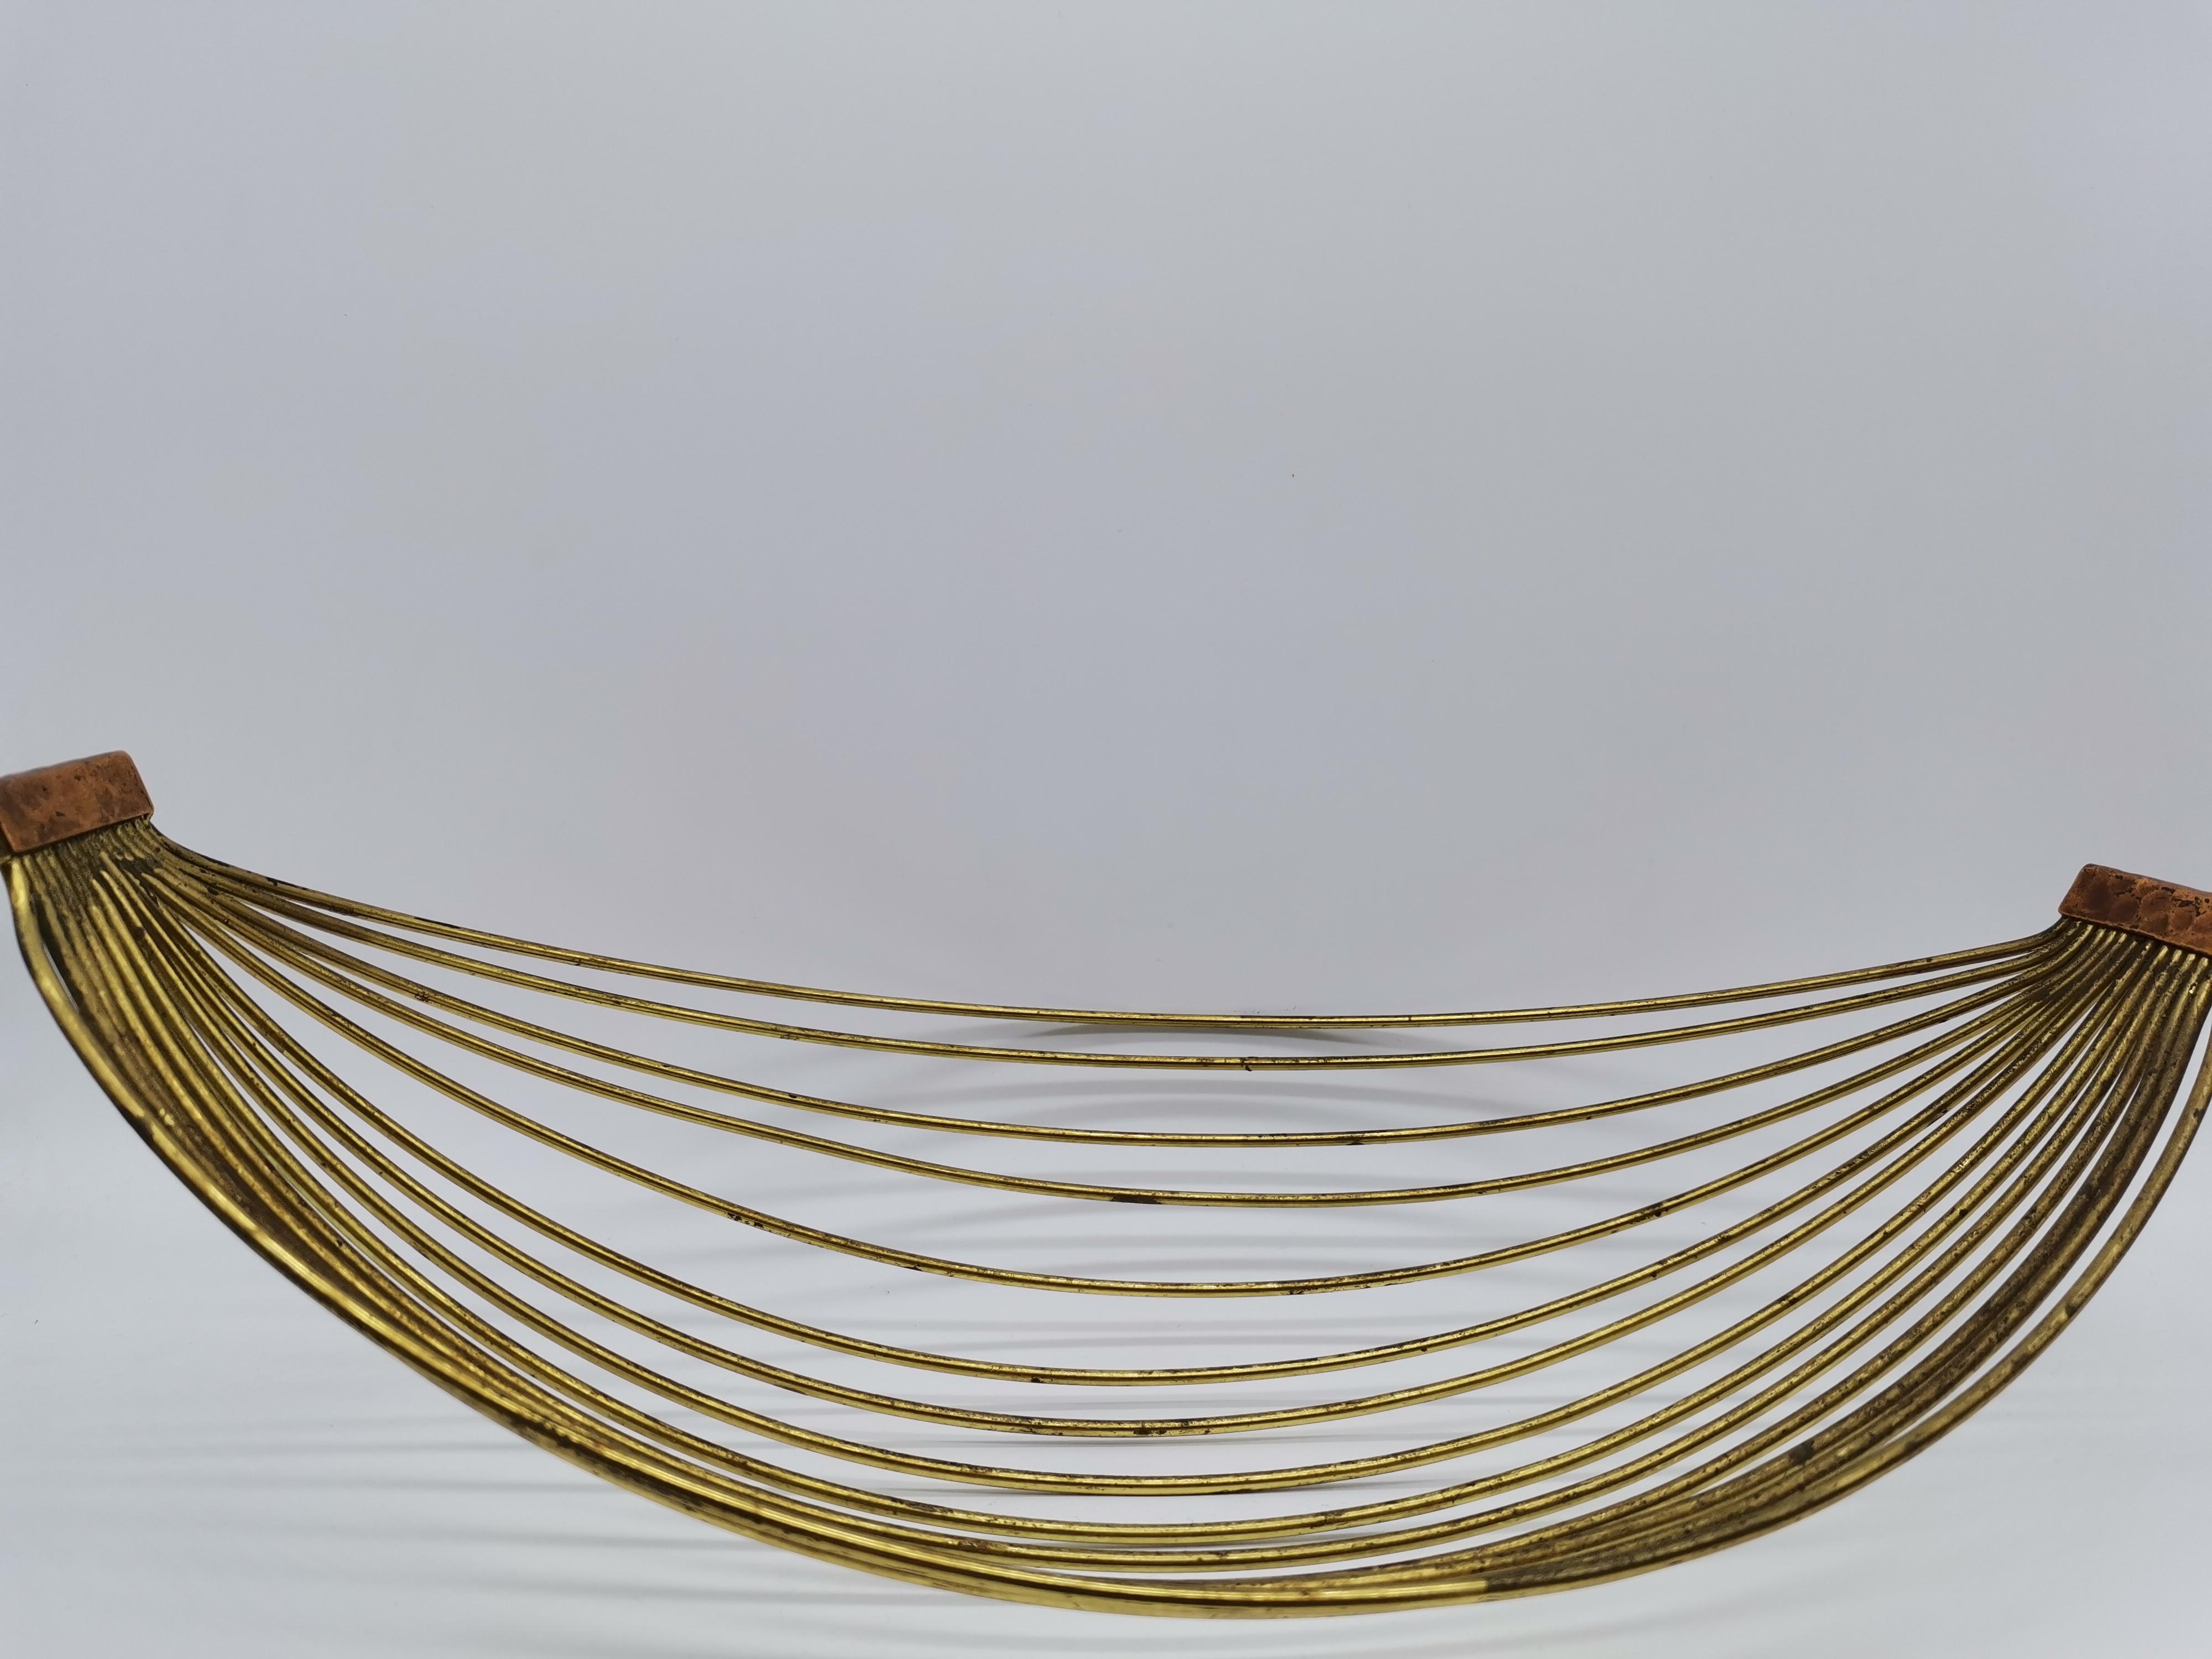 A fruit bowl made of wire brass by Carl Auböck.